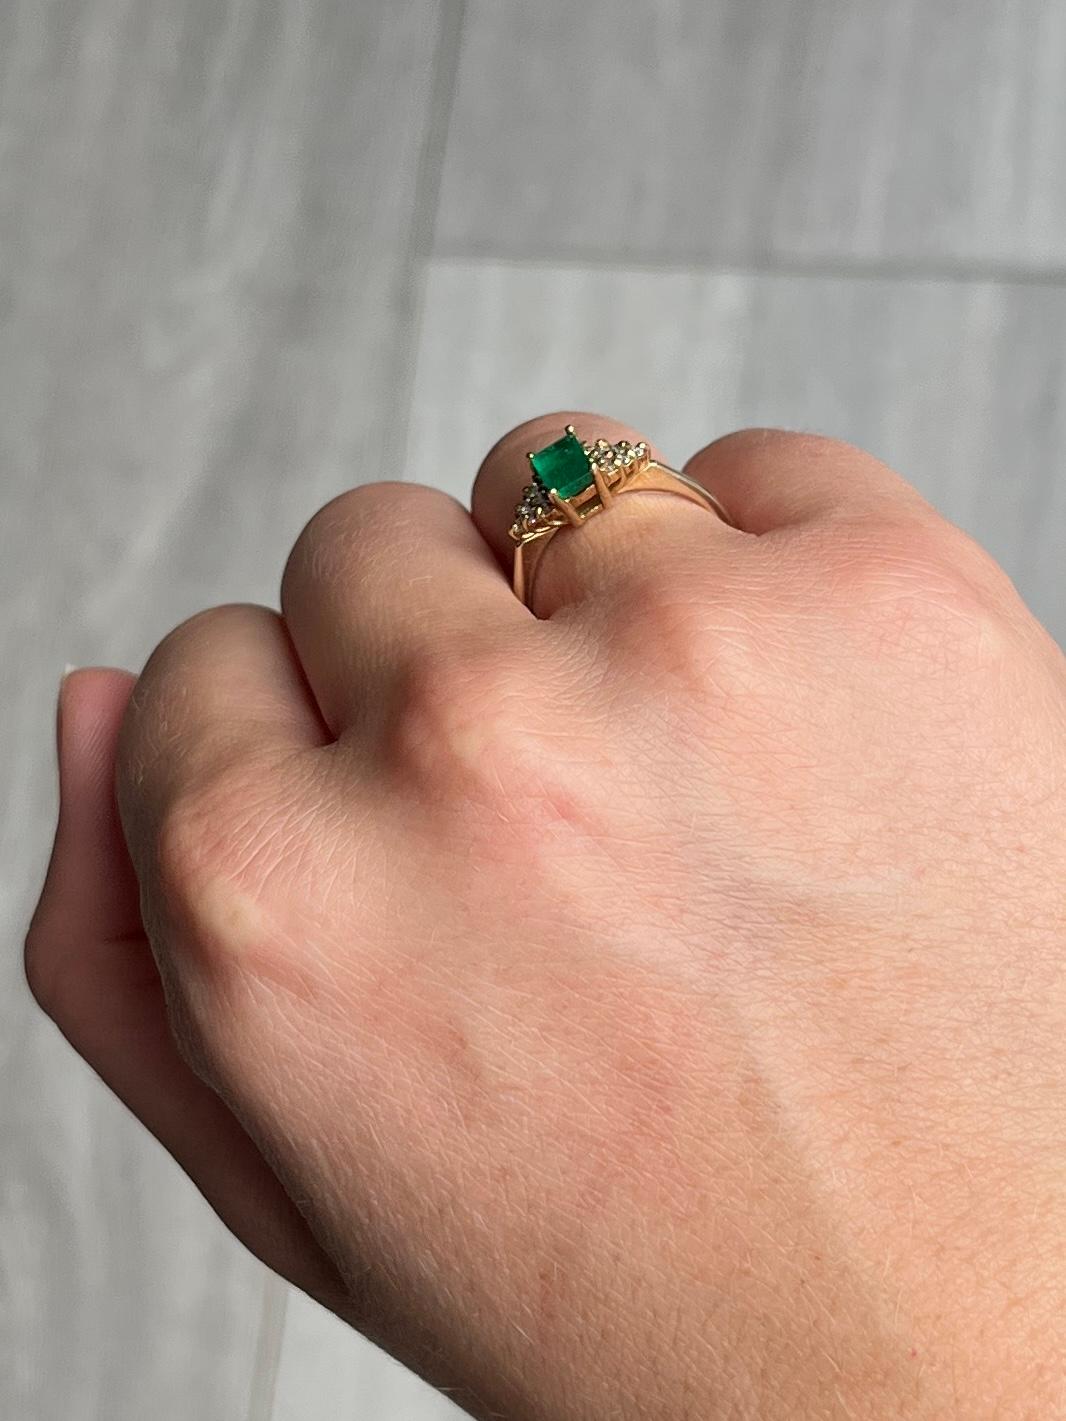 The central emerald is so bright and beautiful and measures 25pts. Sat either side it are six small but shimmering diamond shoulders. The diamonds total approx 6pts. The ring is modelled in 9ct gold.

Ring Size: N or 6 3/4 
Height Off Finger: